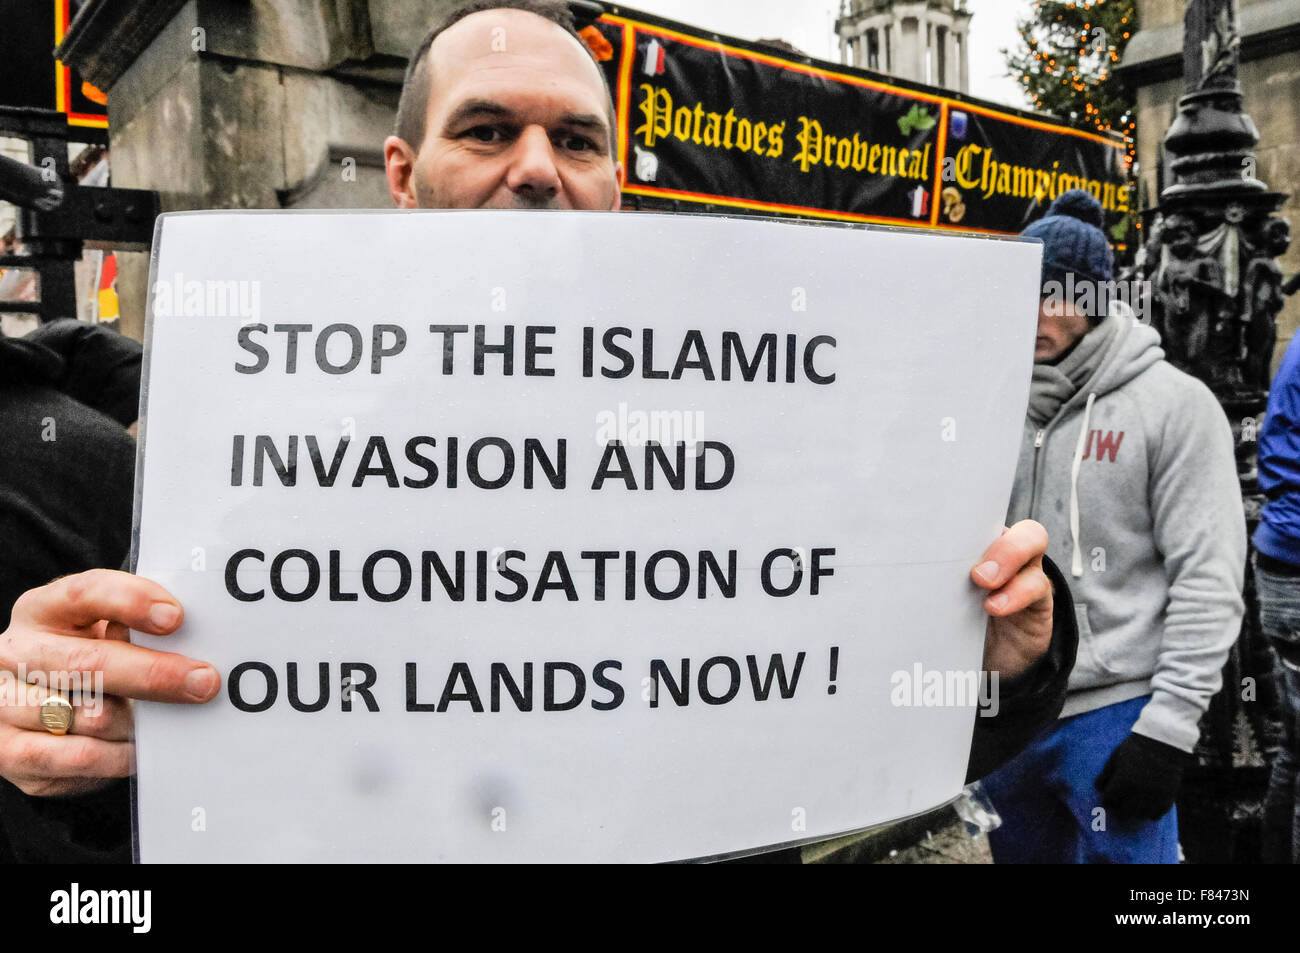 Belfast, Northern Ireland. 05 Dec 2015 - A man holds a poster with the message 'Stop the Islamic invasion and colonisation of our lands now!'. Credit:  Stephen Barnes/Alamy Live News Stock Photo